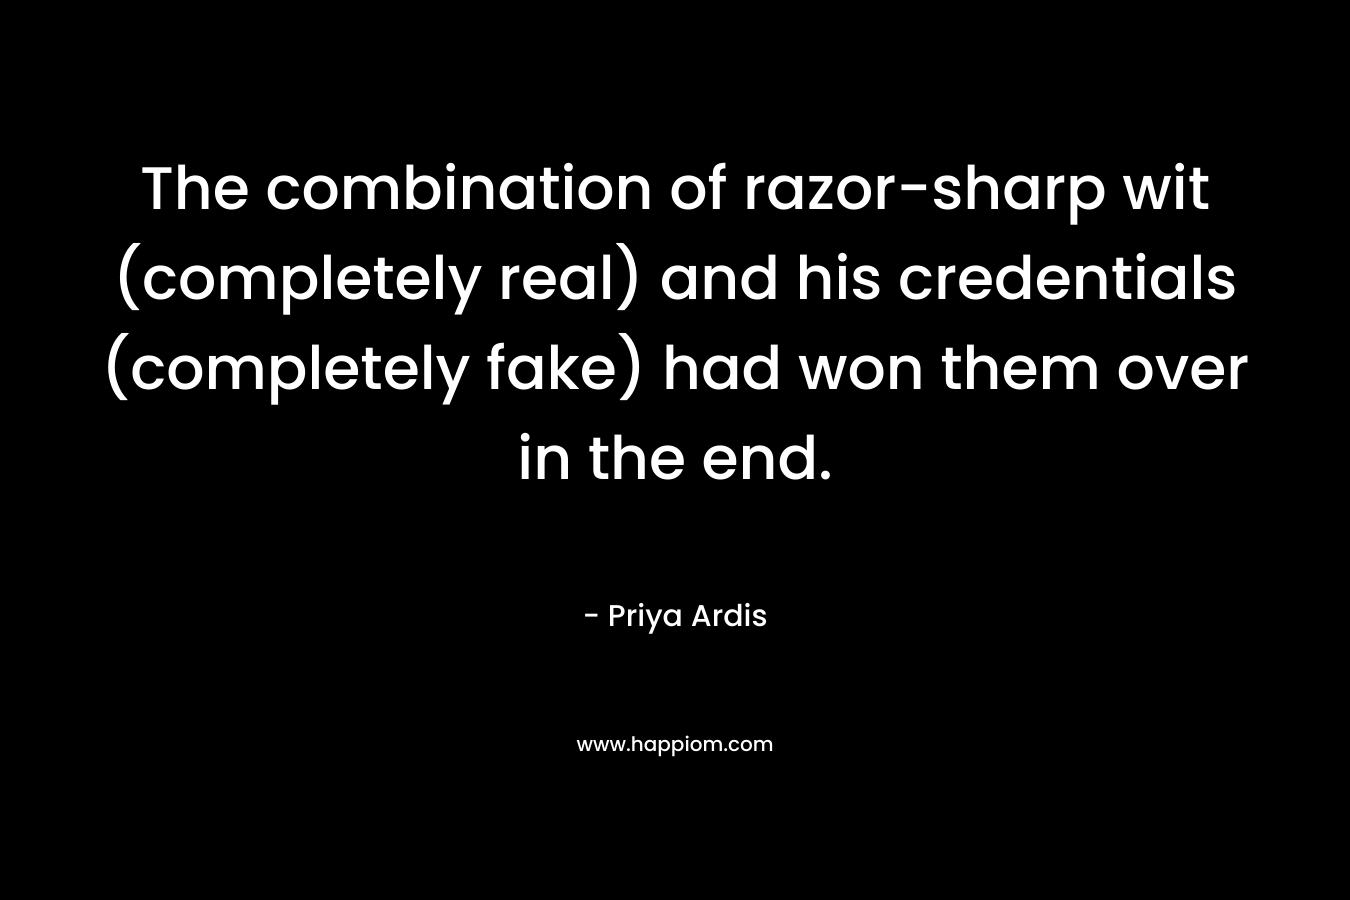 The combination of razor-sharp wit (completely real) and his credentials (completely fake) had won them over in the end. – Priya Ardis